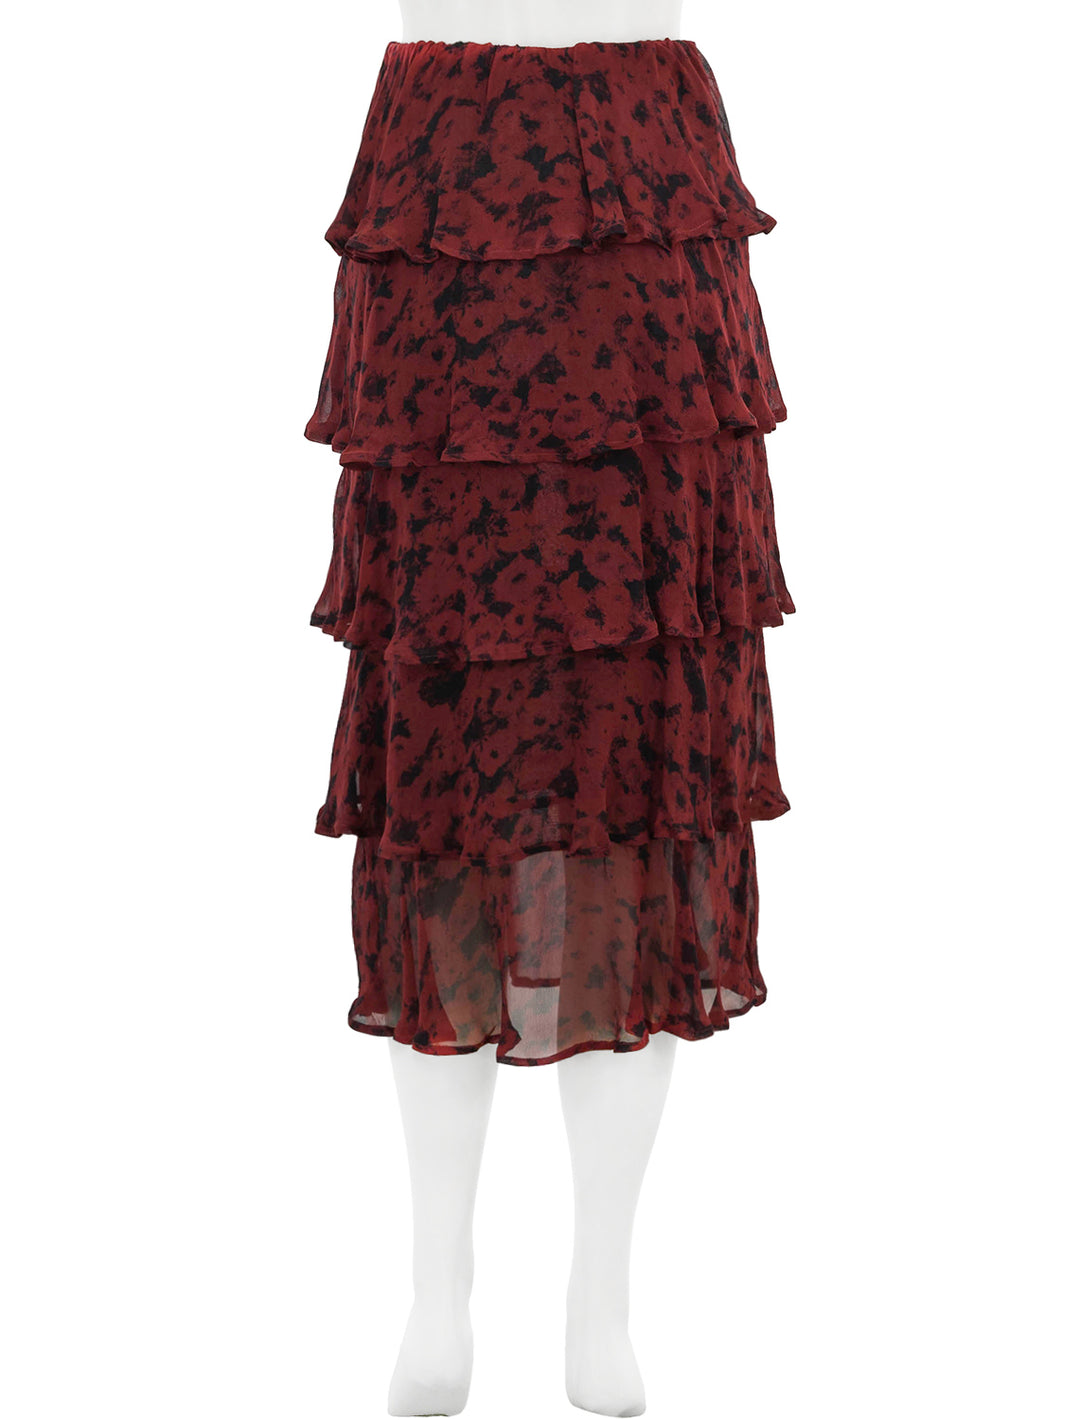 Back view of GANNI's tiered skirt in syrah.